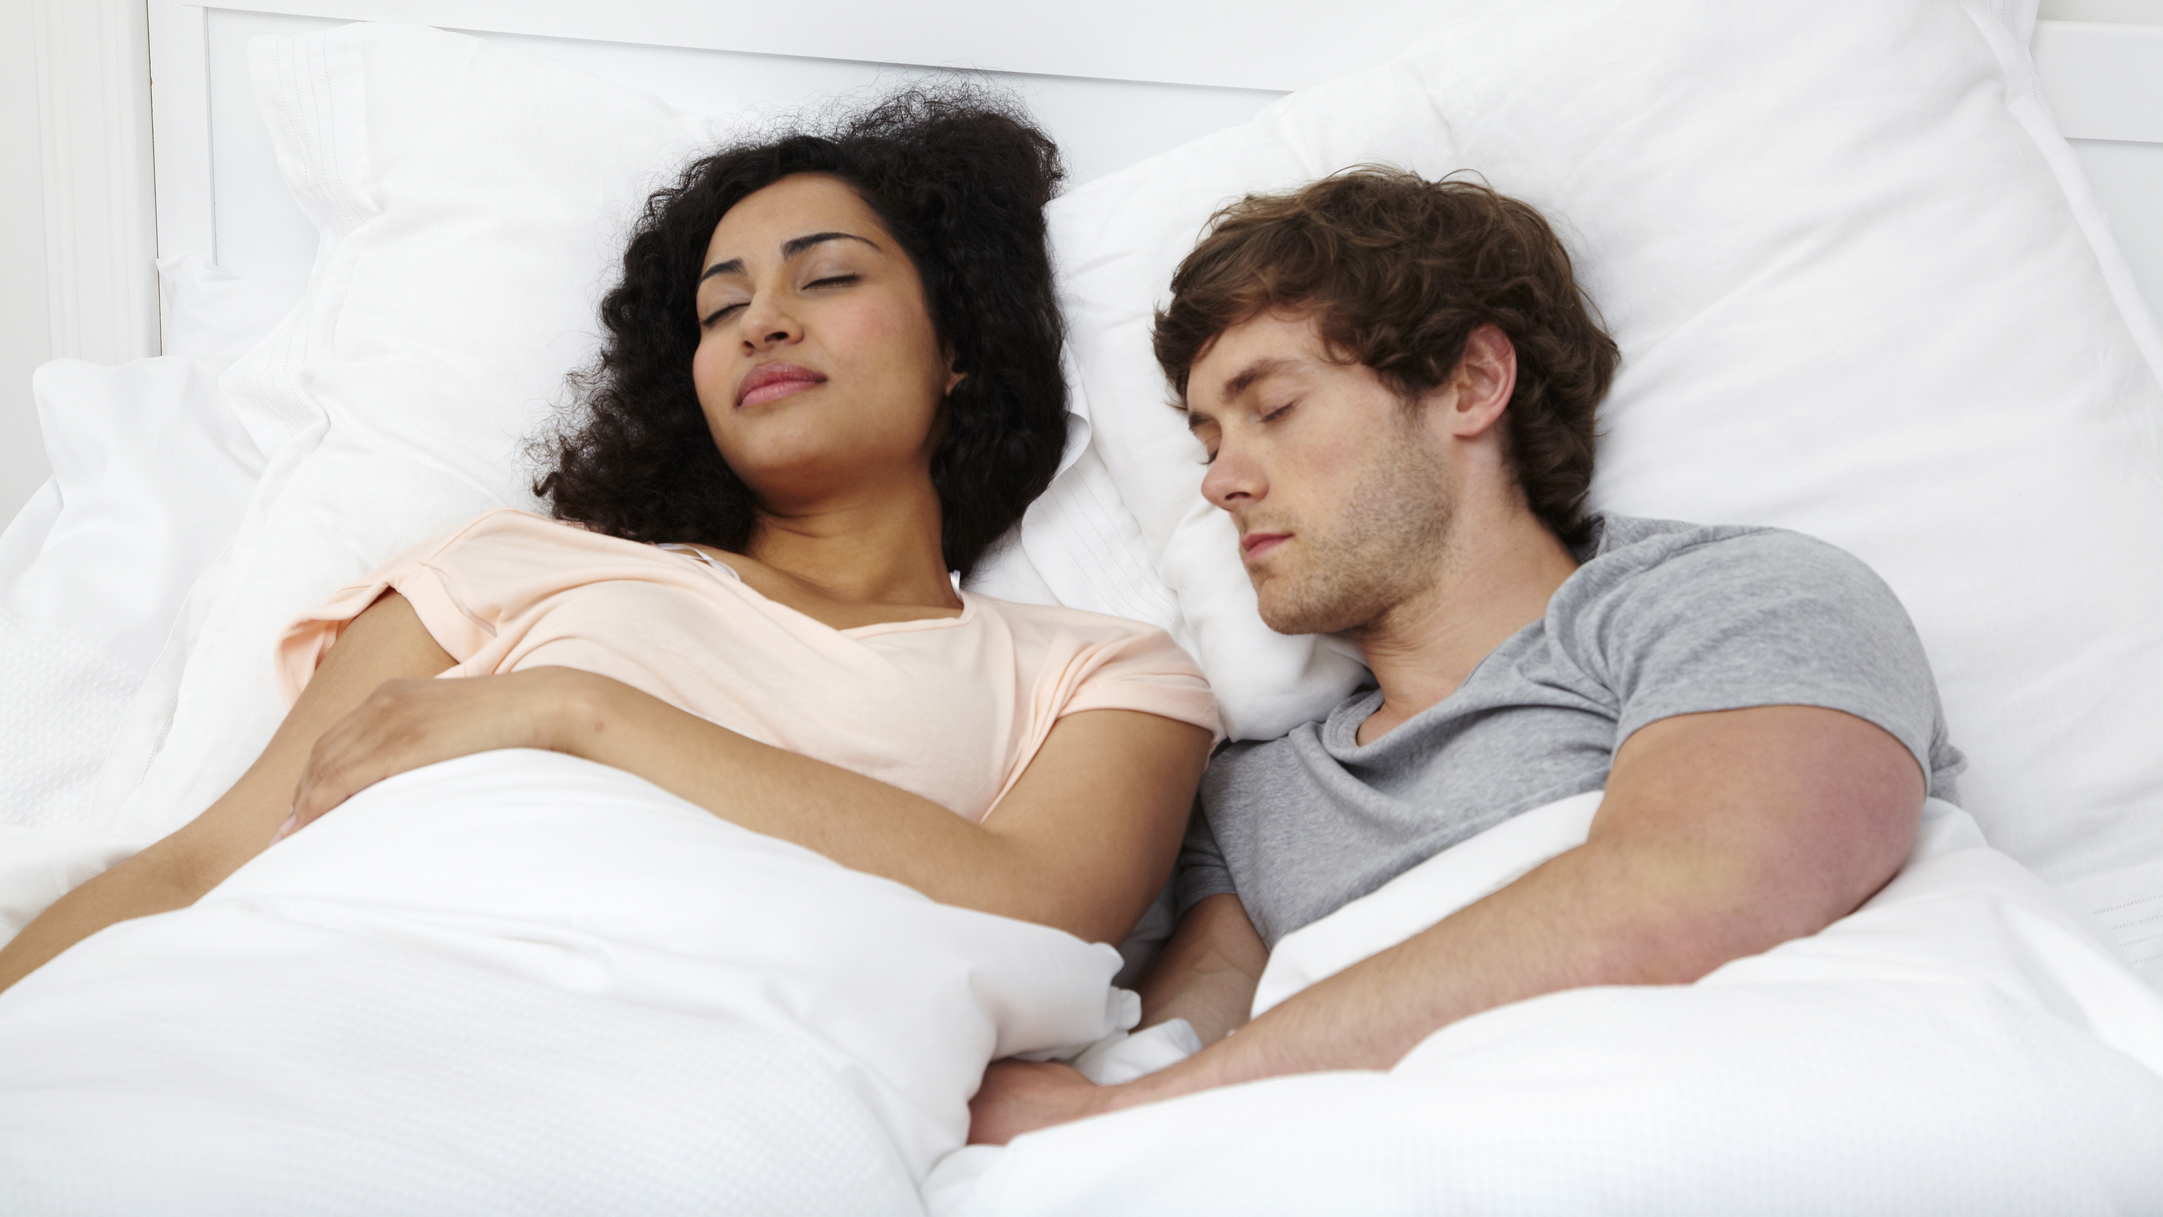 Images shows a couple asleep together in bed, resting on white pillows